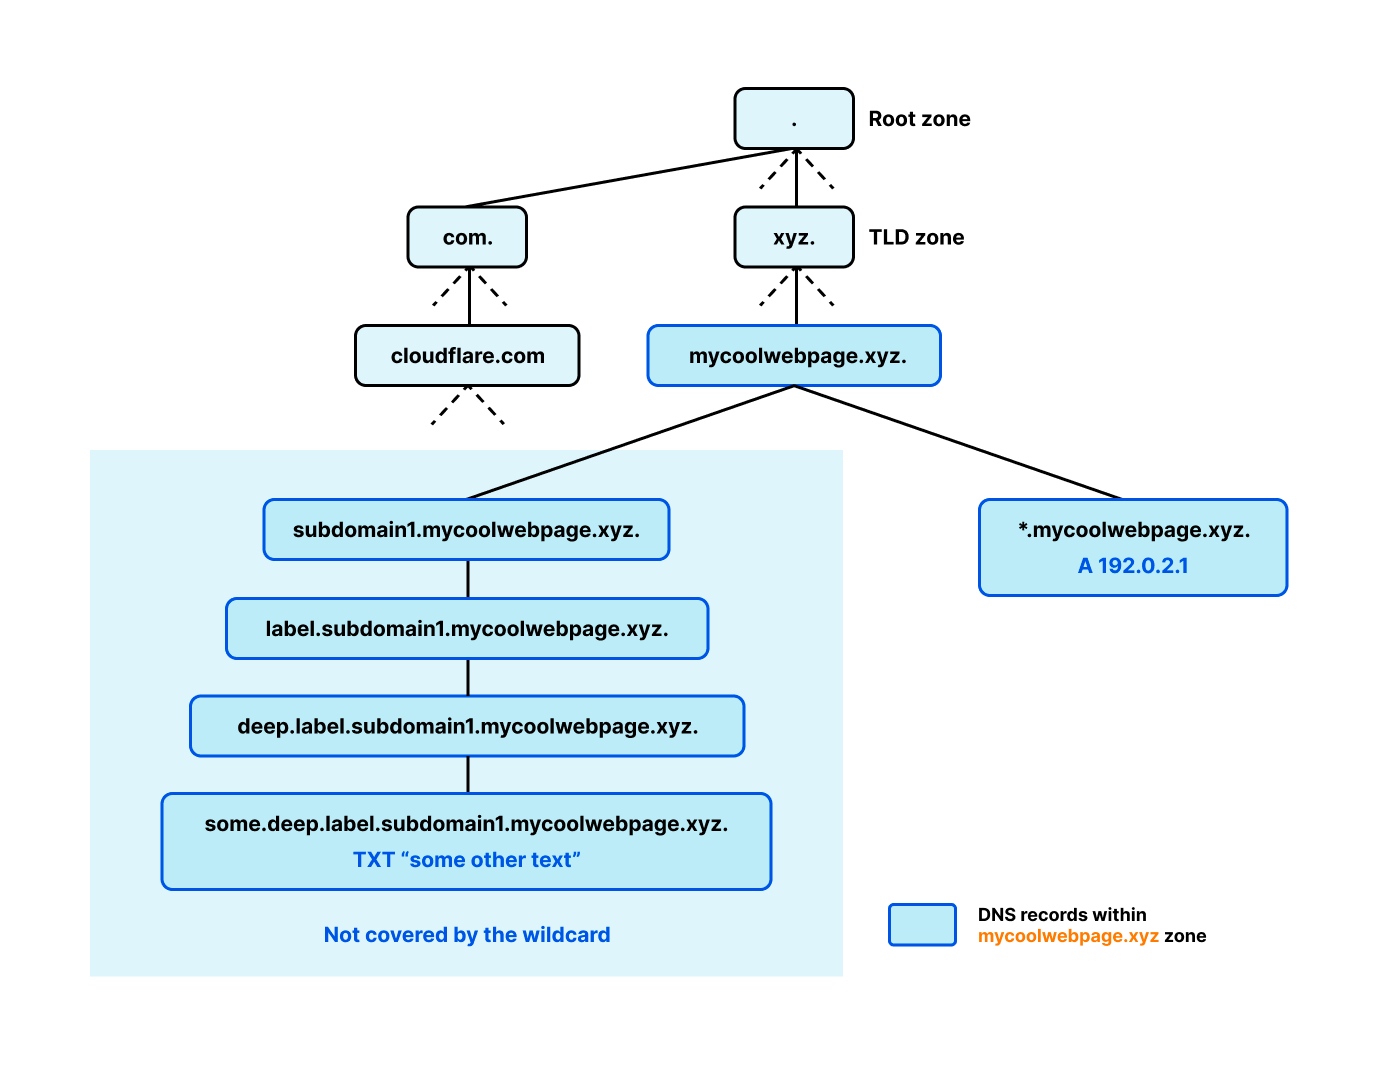 DNS tree structure for mycoolwebpage.xyz